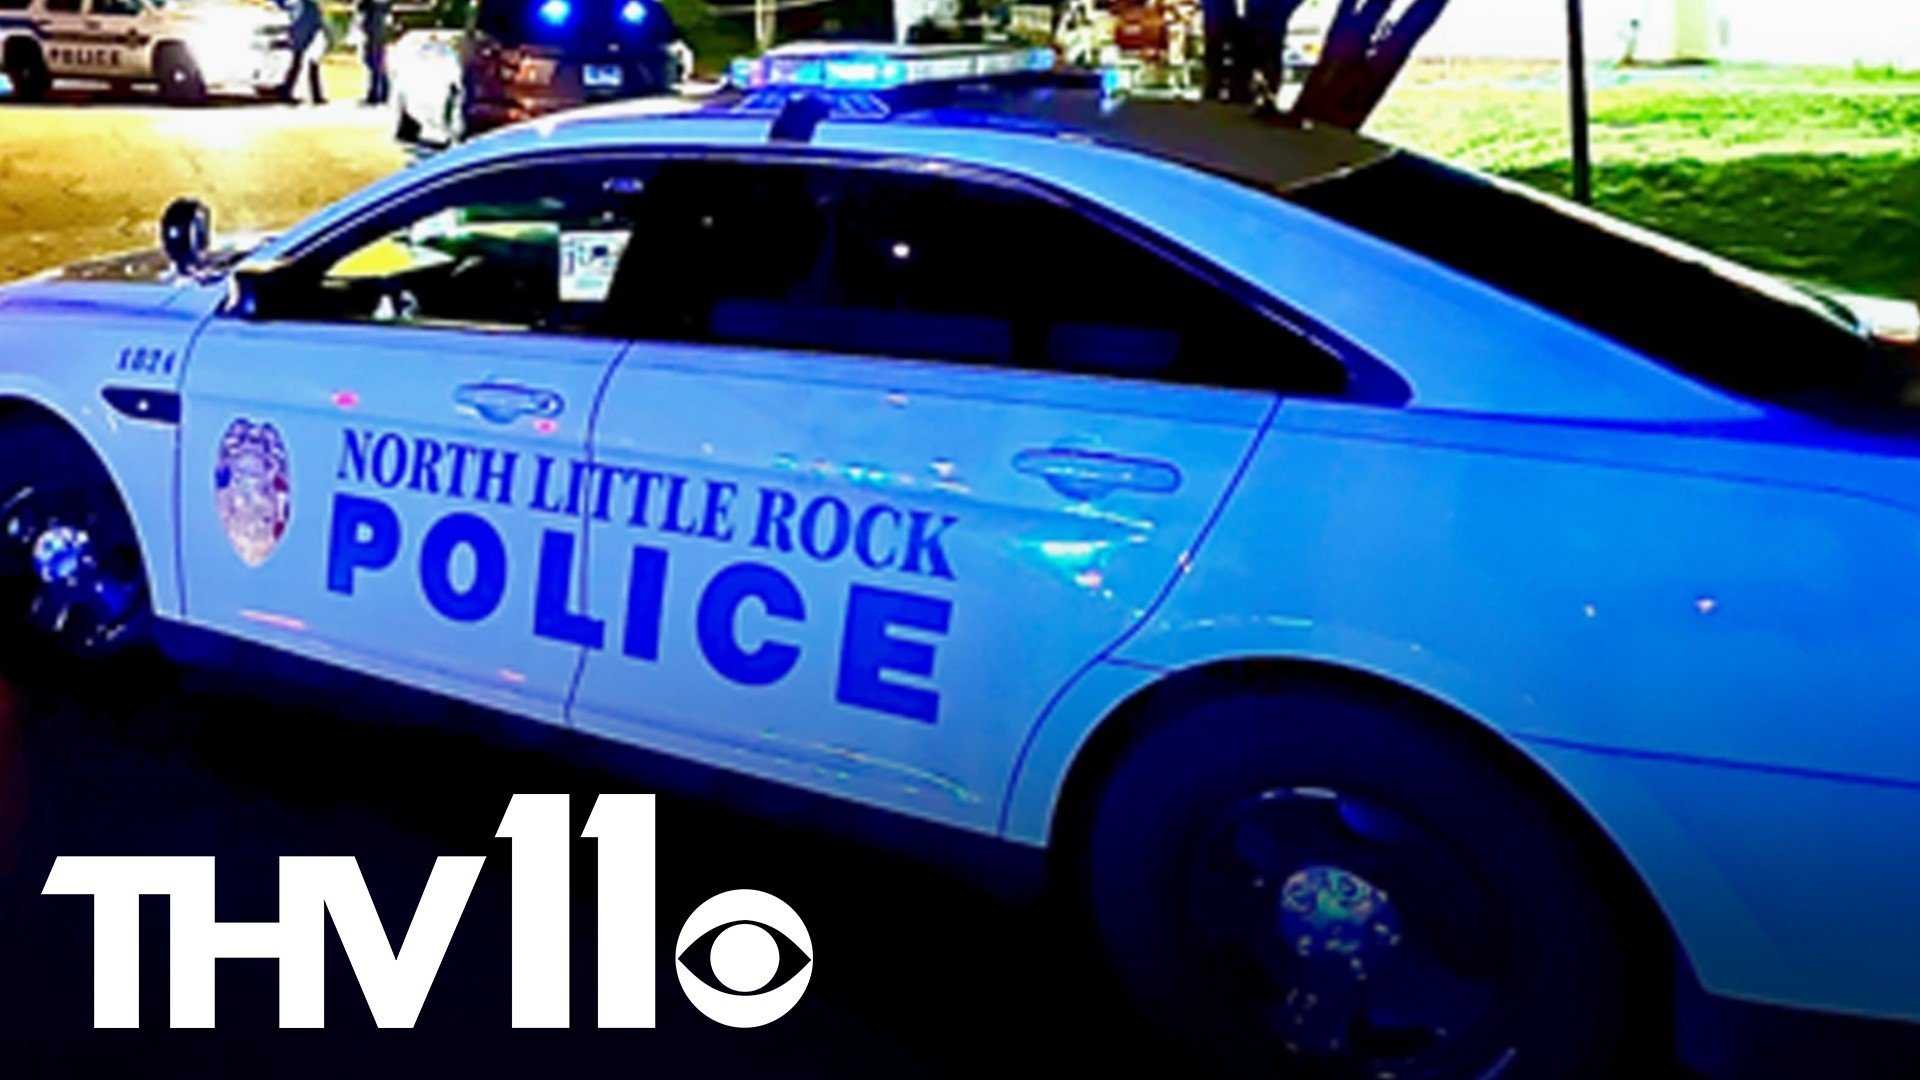 The North Little Rock Police Department is investigating an incident where an officer shot at a suspect on Saturday night.